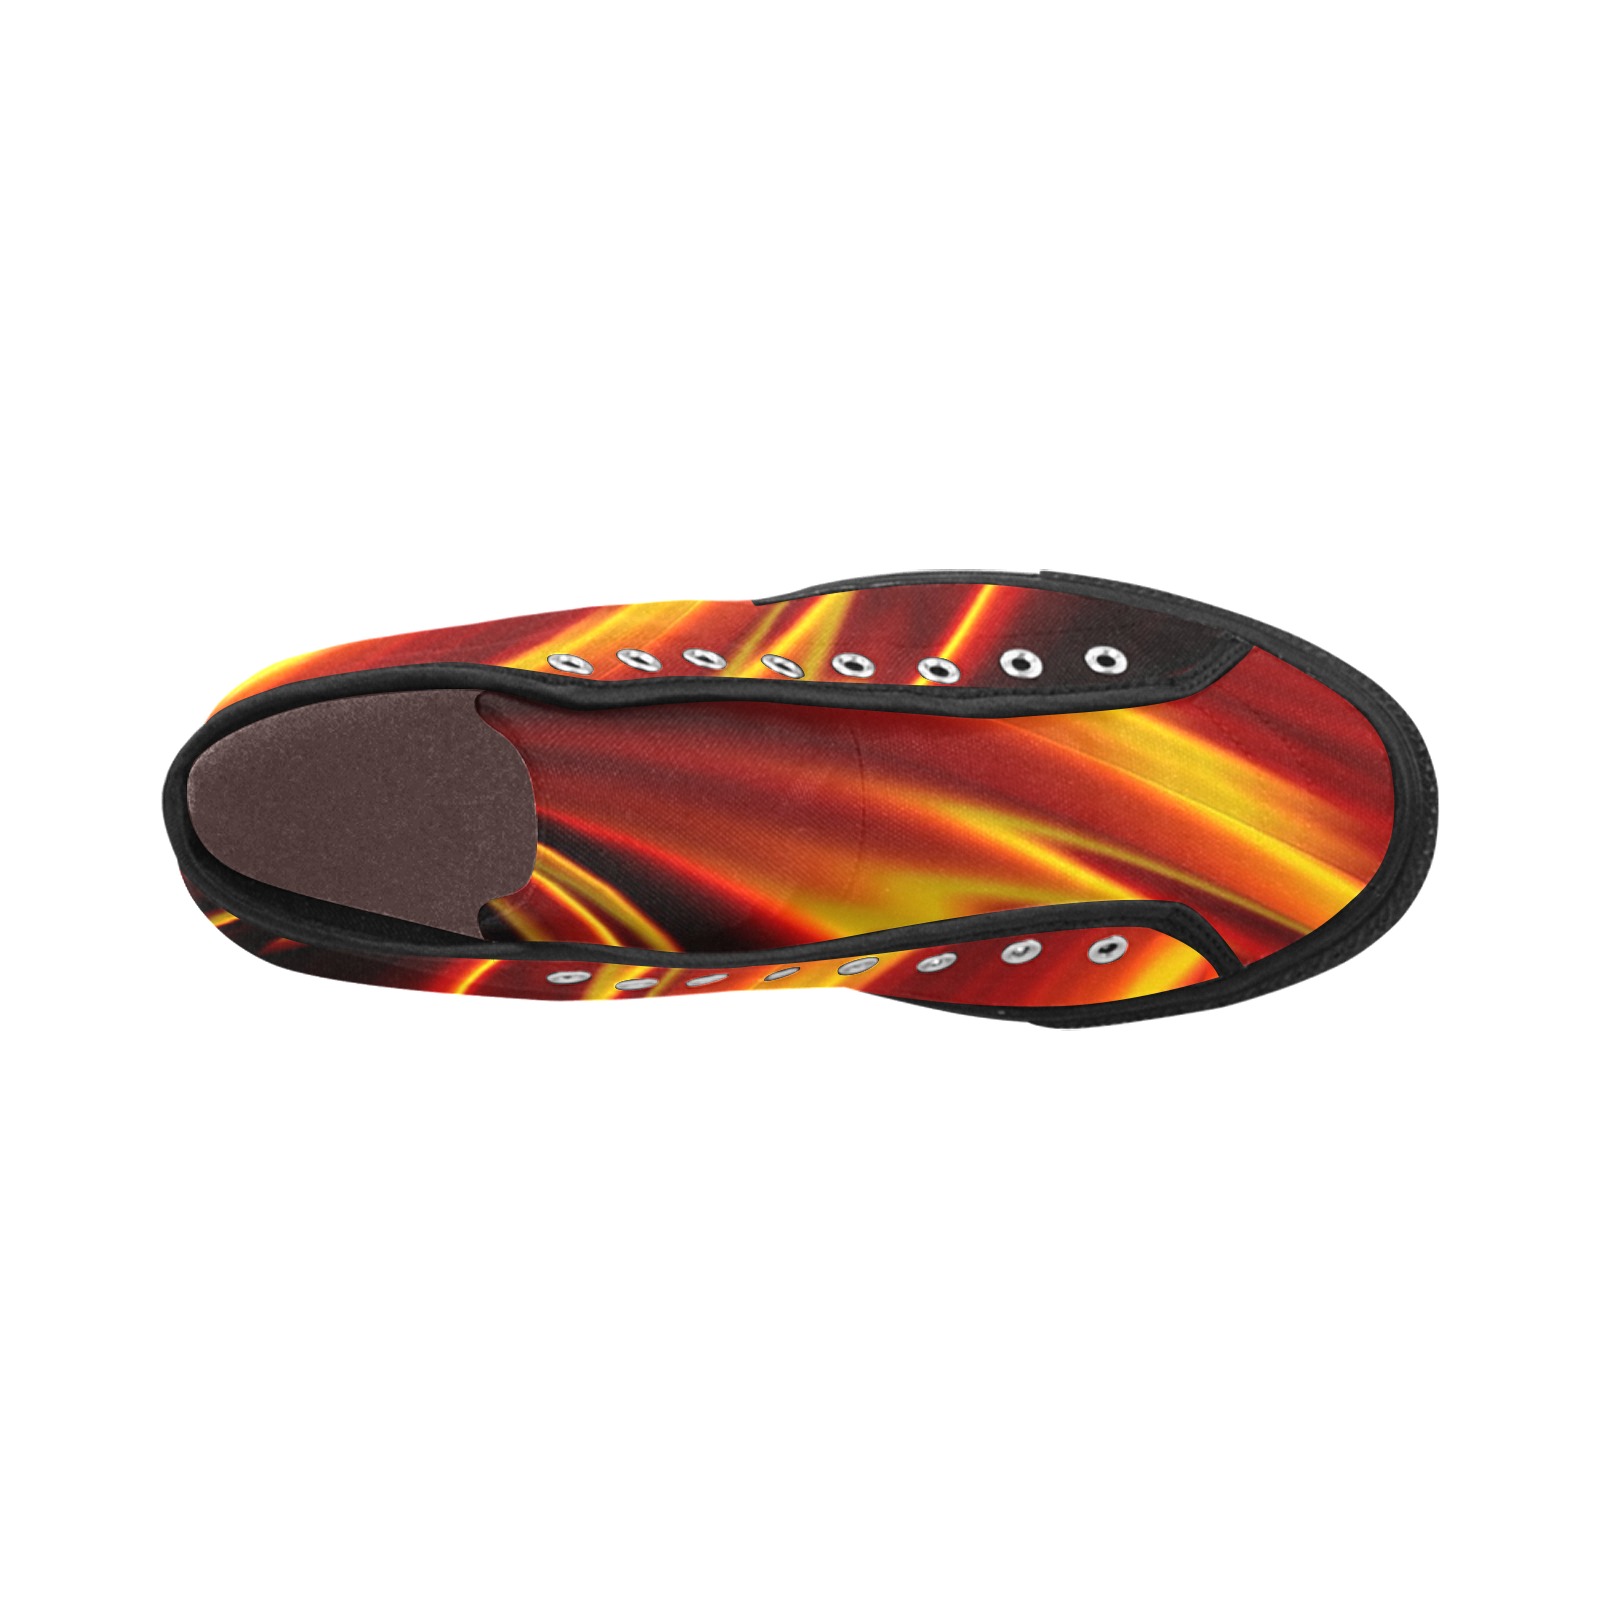 Orange and Red Flames Fractal Abstract Vancouver H Men's Canvas Shoes (1013-1)